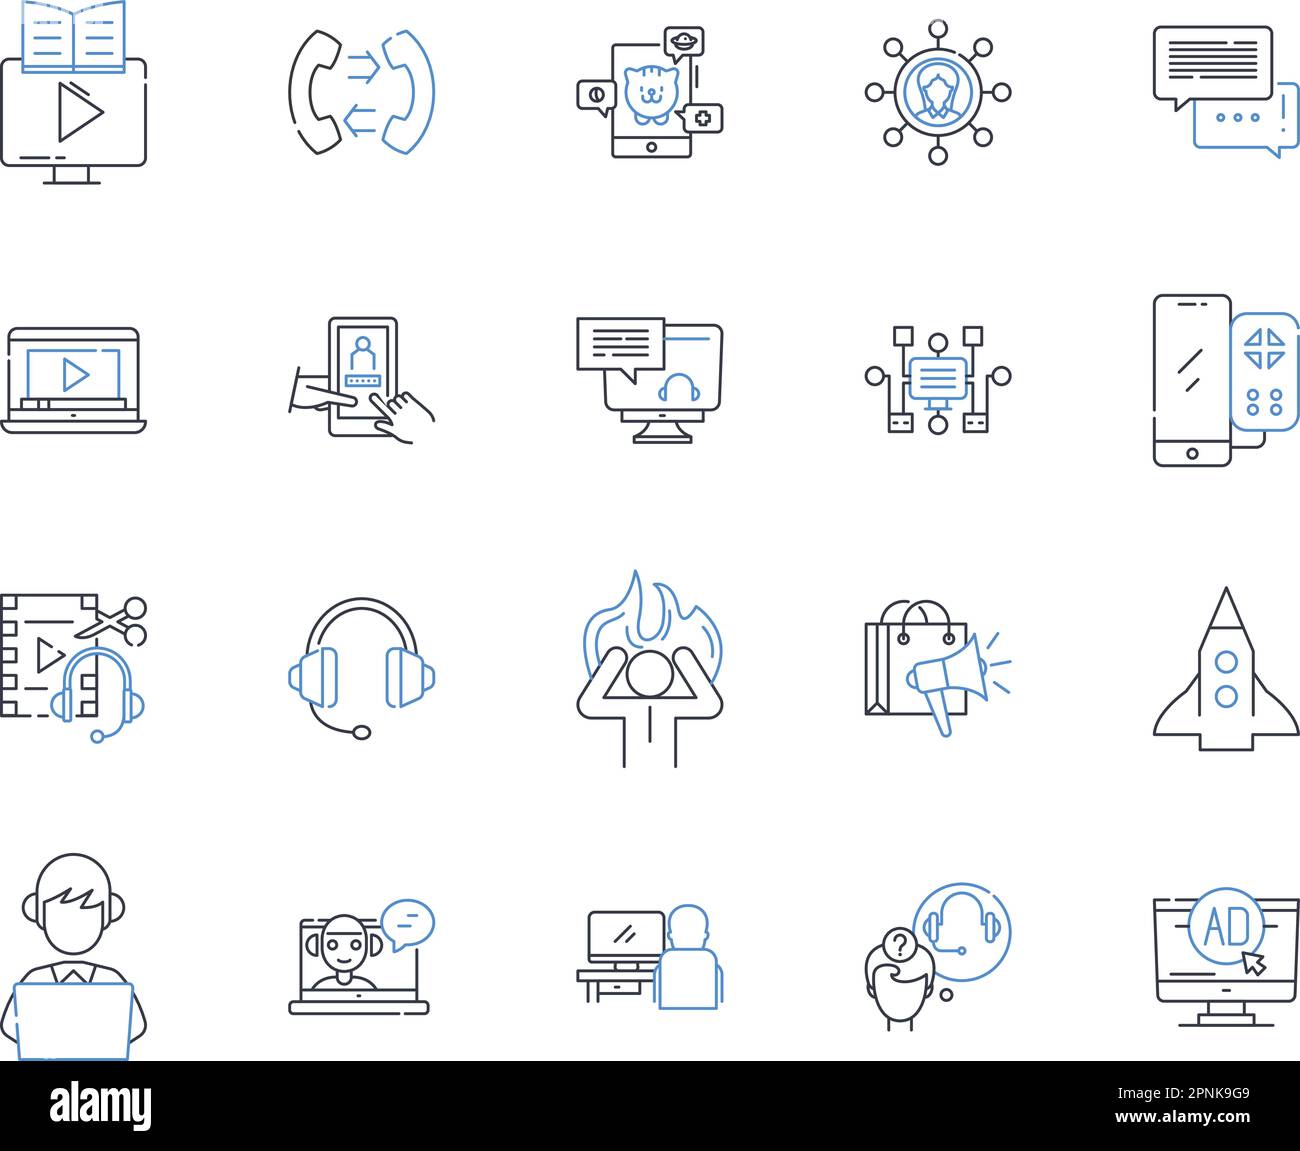 Neural nerks line icons collection. Artificial, Intelligence, Brain, Computation, Nerks, Learning, Synapse vector and linear illustration. Algorithm Stock Vector